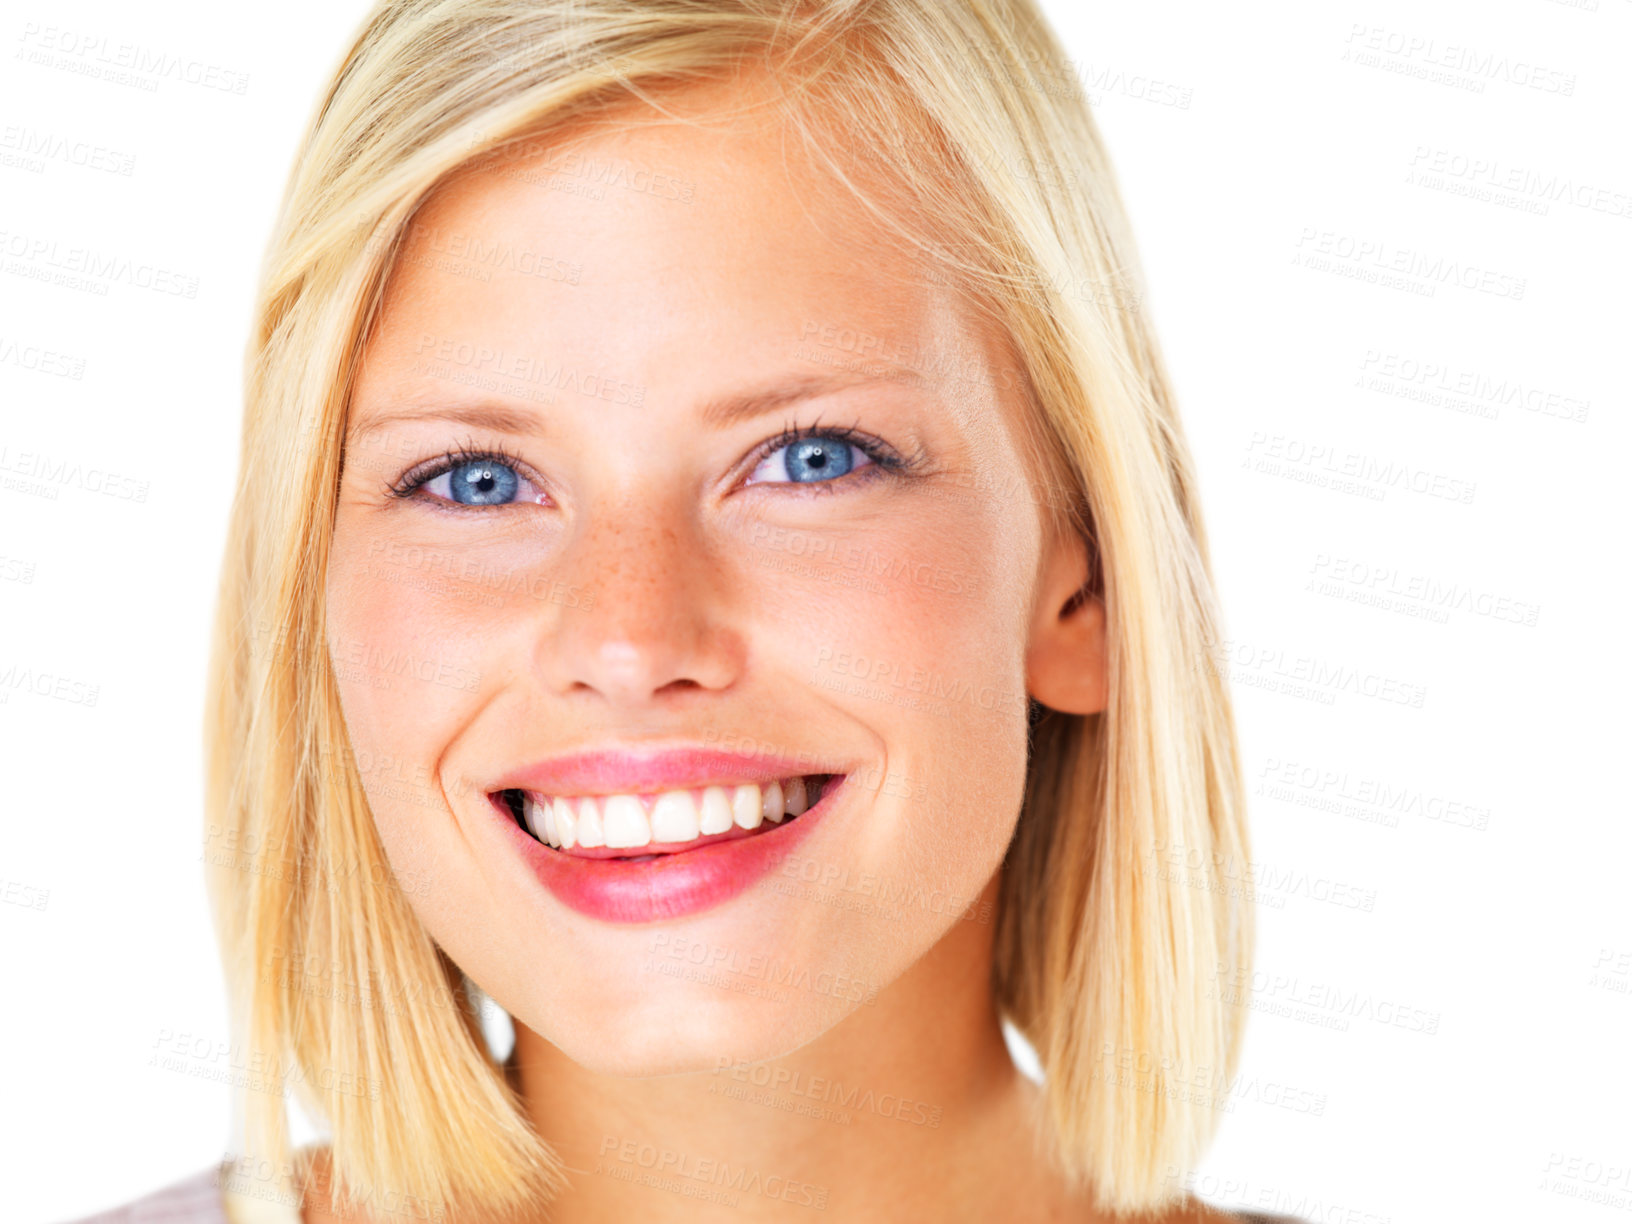 Buy stock photo Gorgeous young blond woman smiling happily against a white background